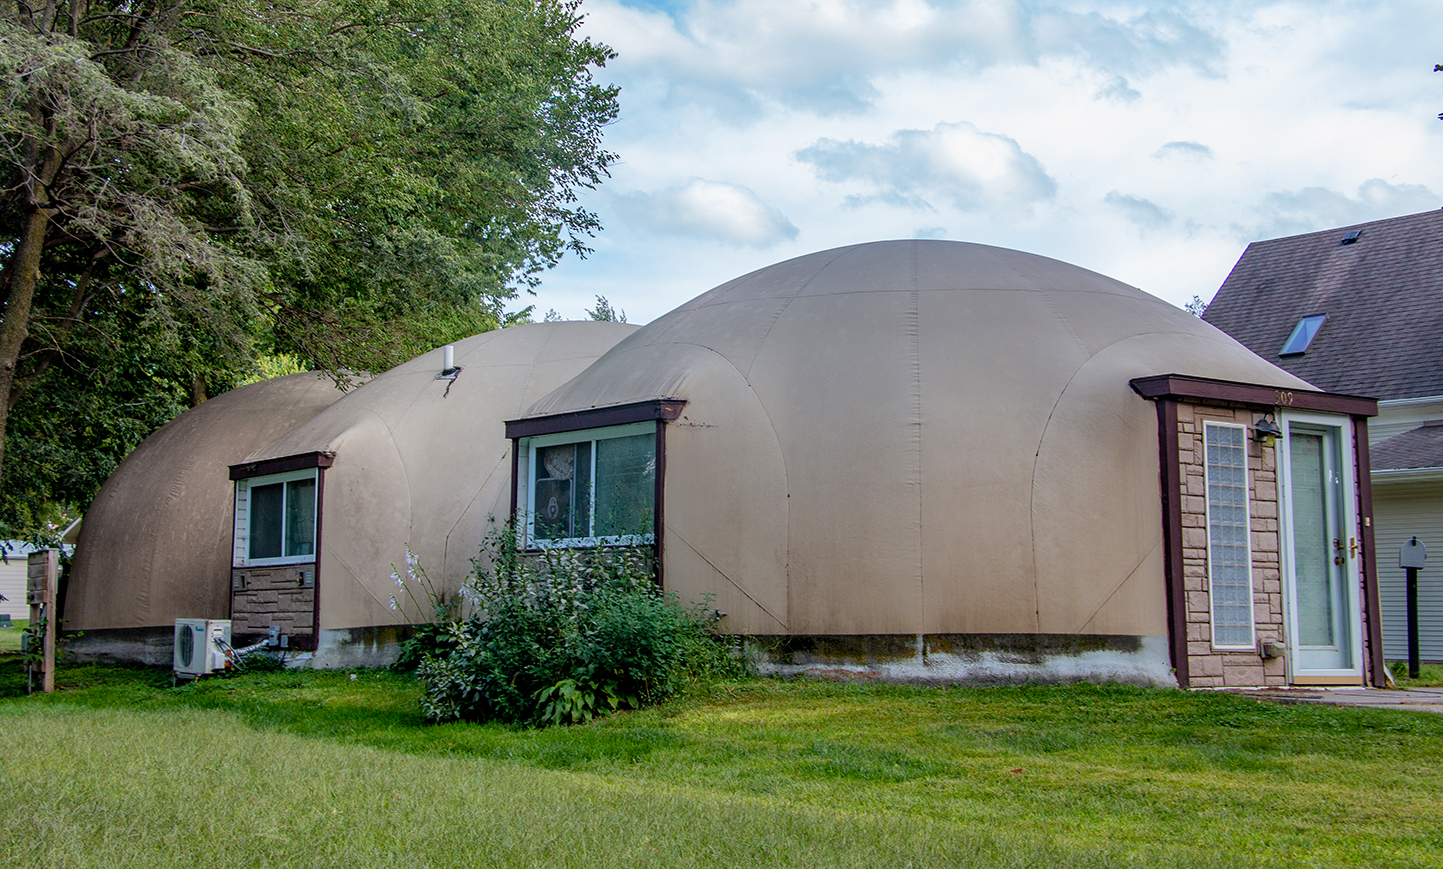 A house on Center Street: the story behind Vermillion’s other dome